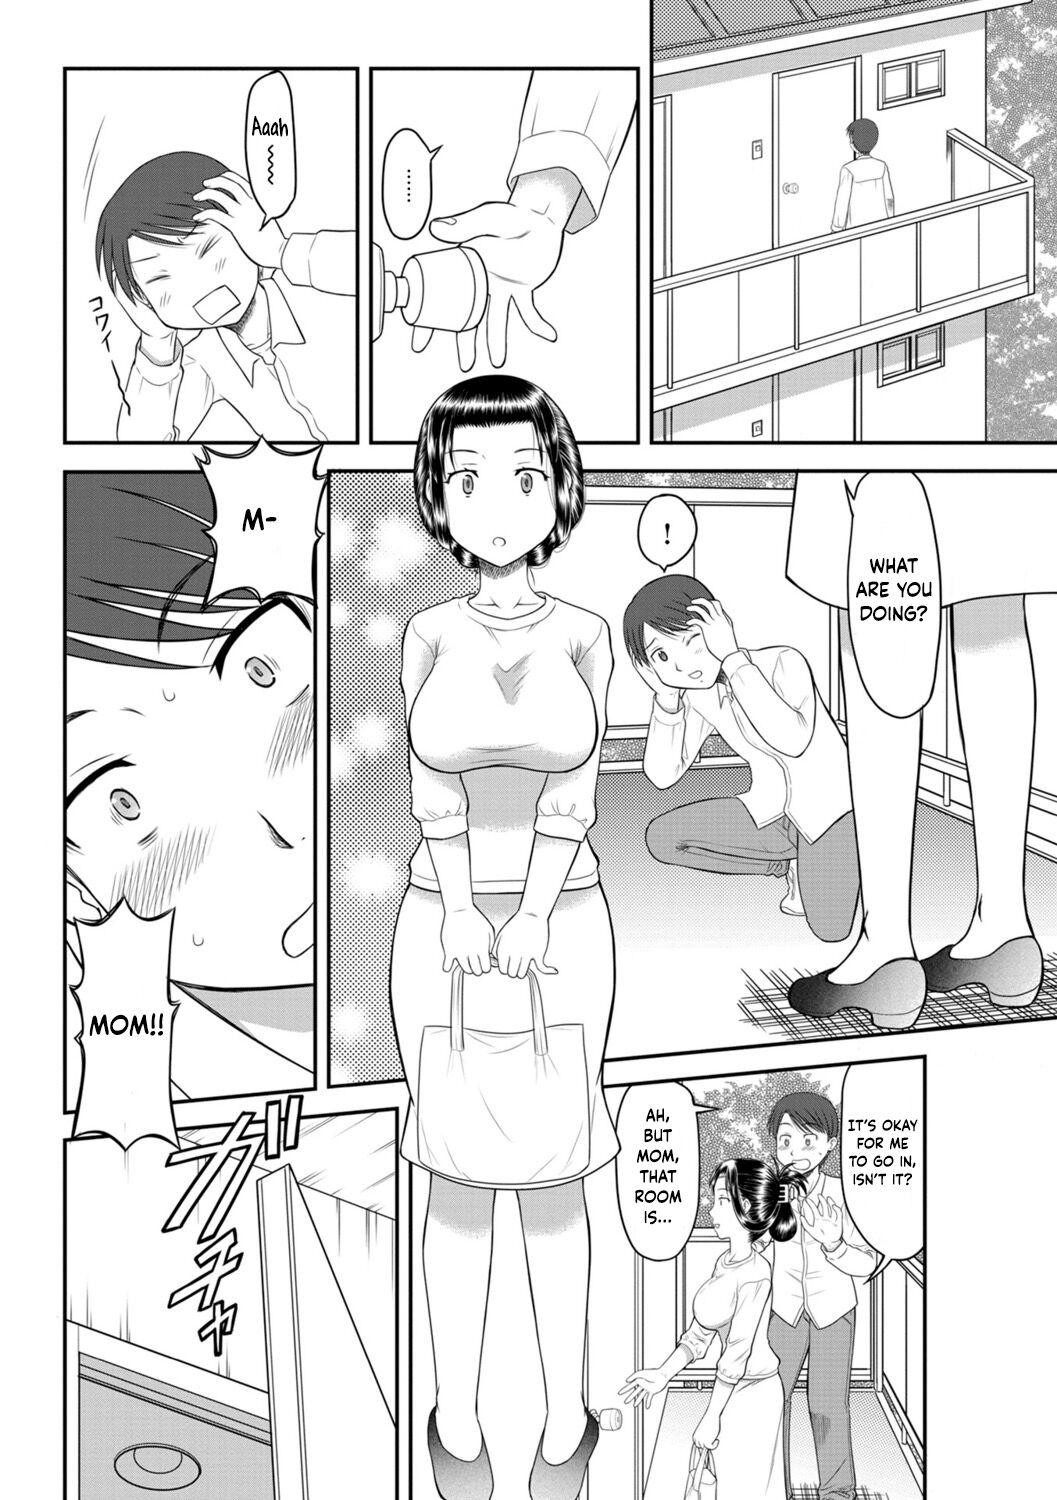 Negao Me, My Mom, and the Room With a History Hand Job - Page 2